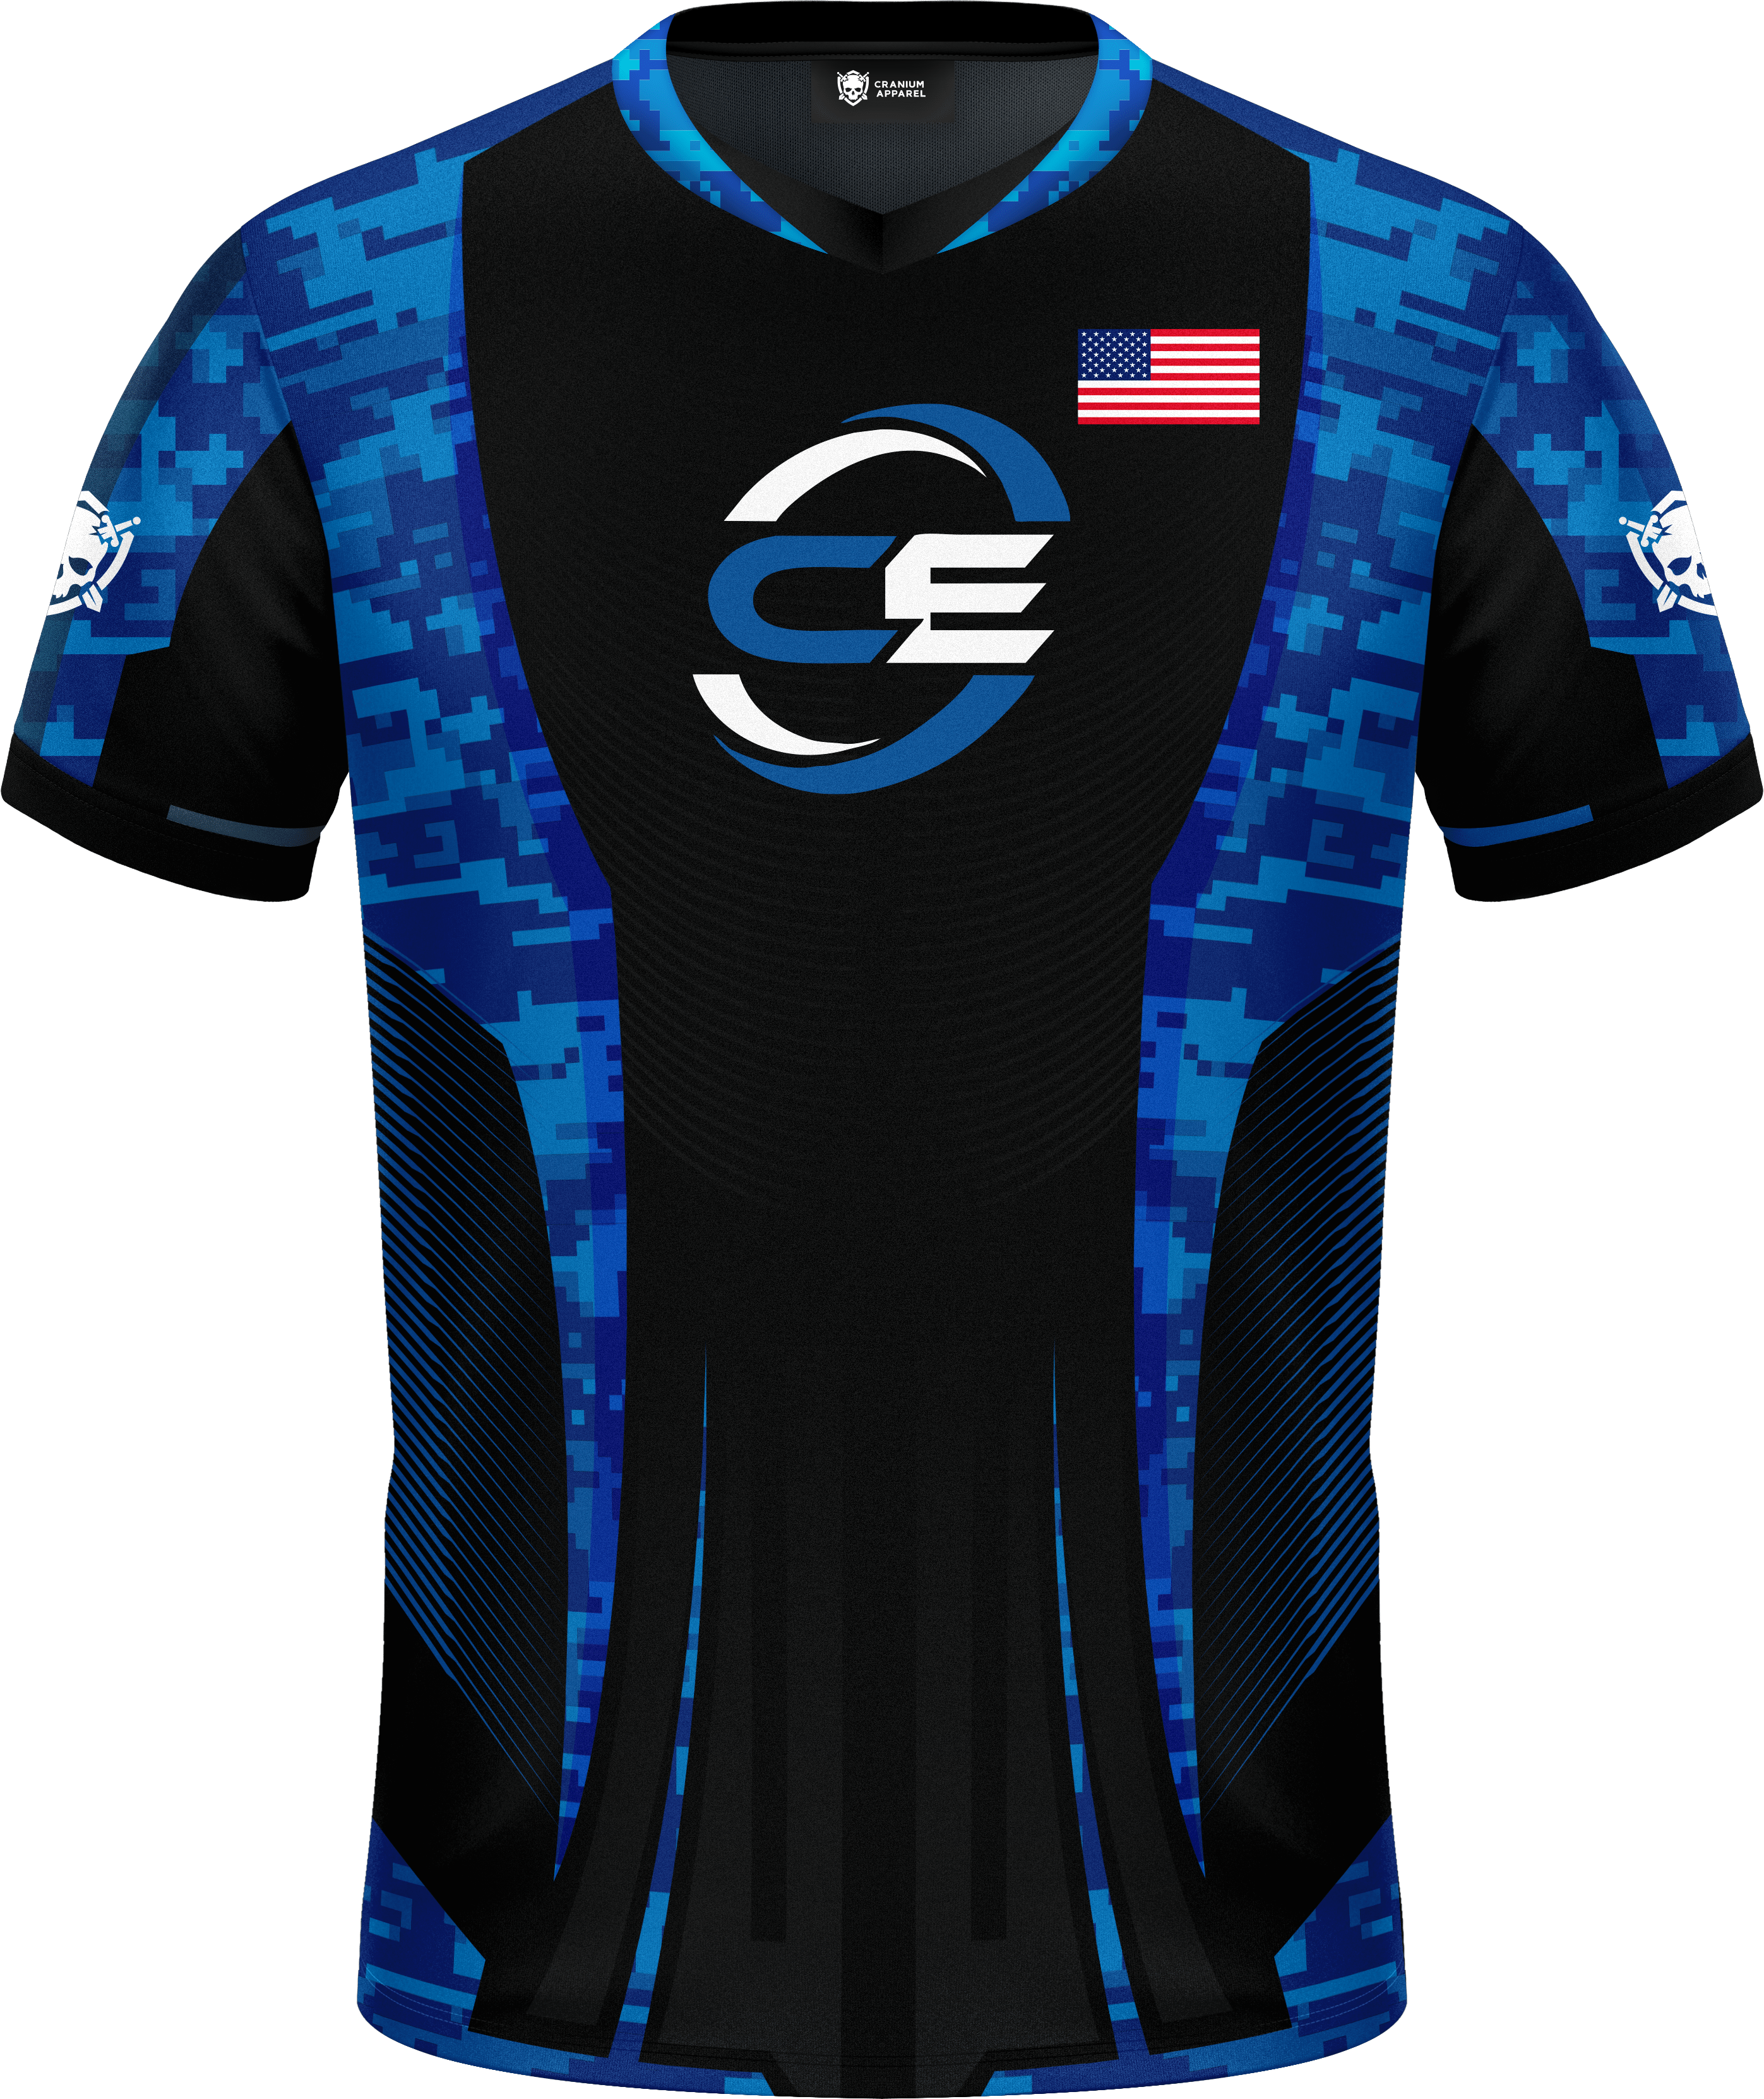 Download 266+ Mockup Jersey Esport Polos Png Download Free